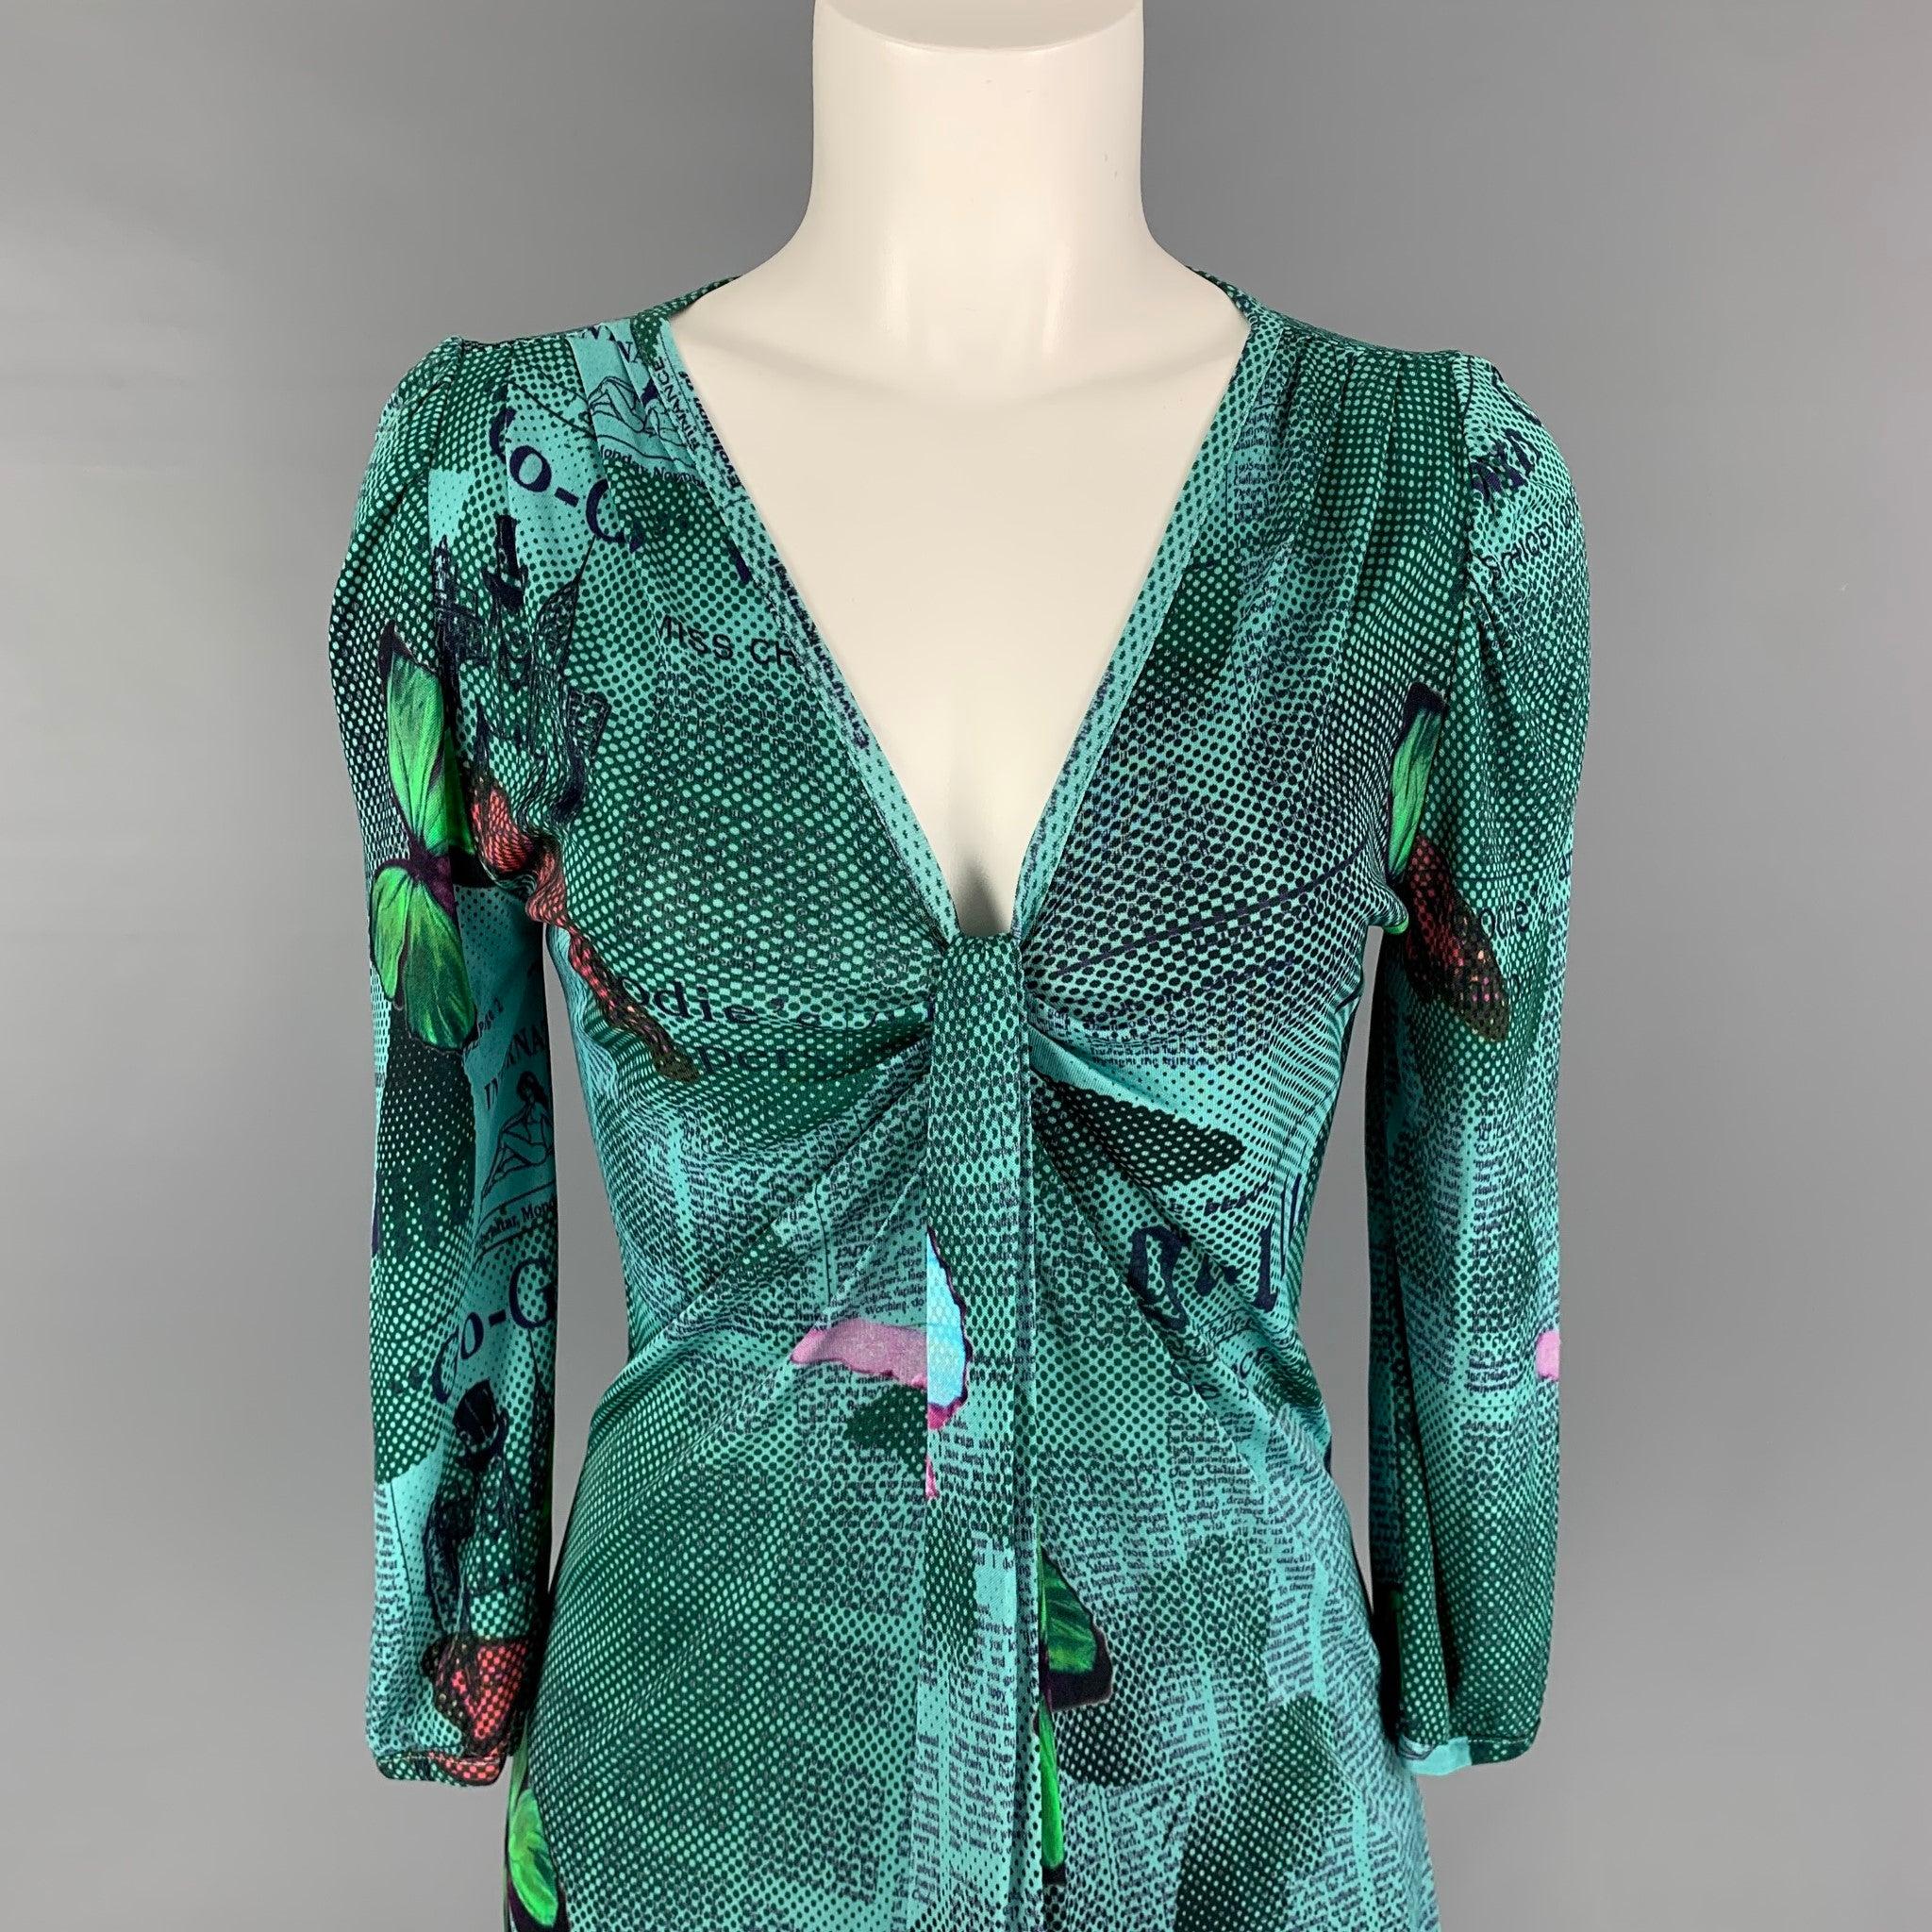 Vintage JOHN GALLIANO blouse comes in a multi-color jersey 'Gazette Newsprint' viscose featuring a front ruched design and a v-neck. Made in Italy.
Excellent
Pre-Owned Condition. 

Marked:   XS 

Measurements: 
 
Shoulder: 14 inches  Bust: 32 inches